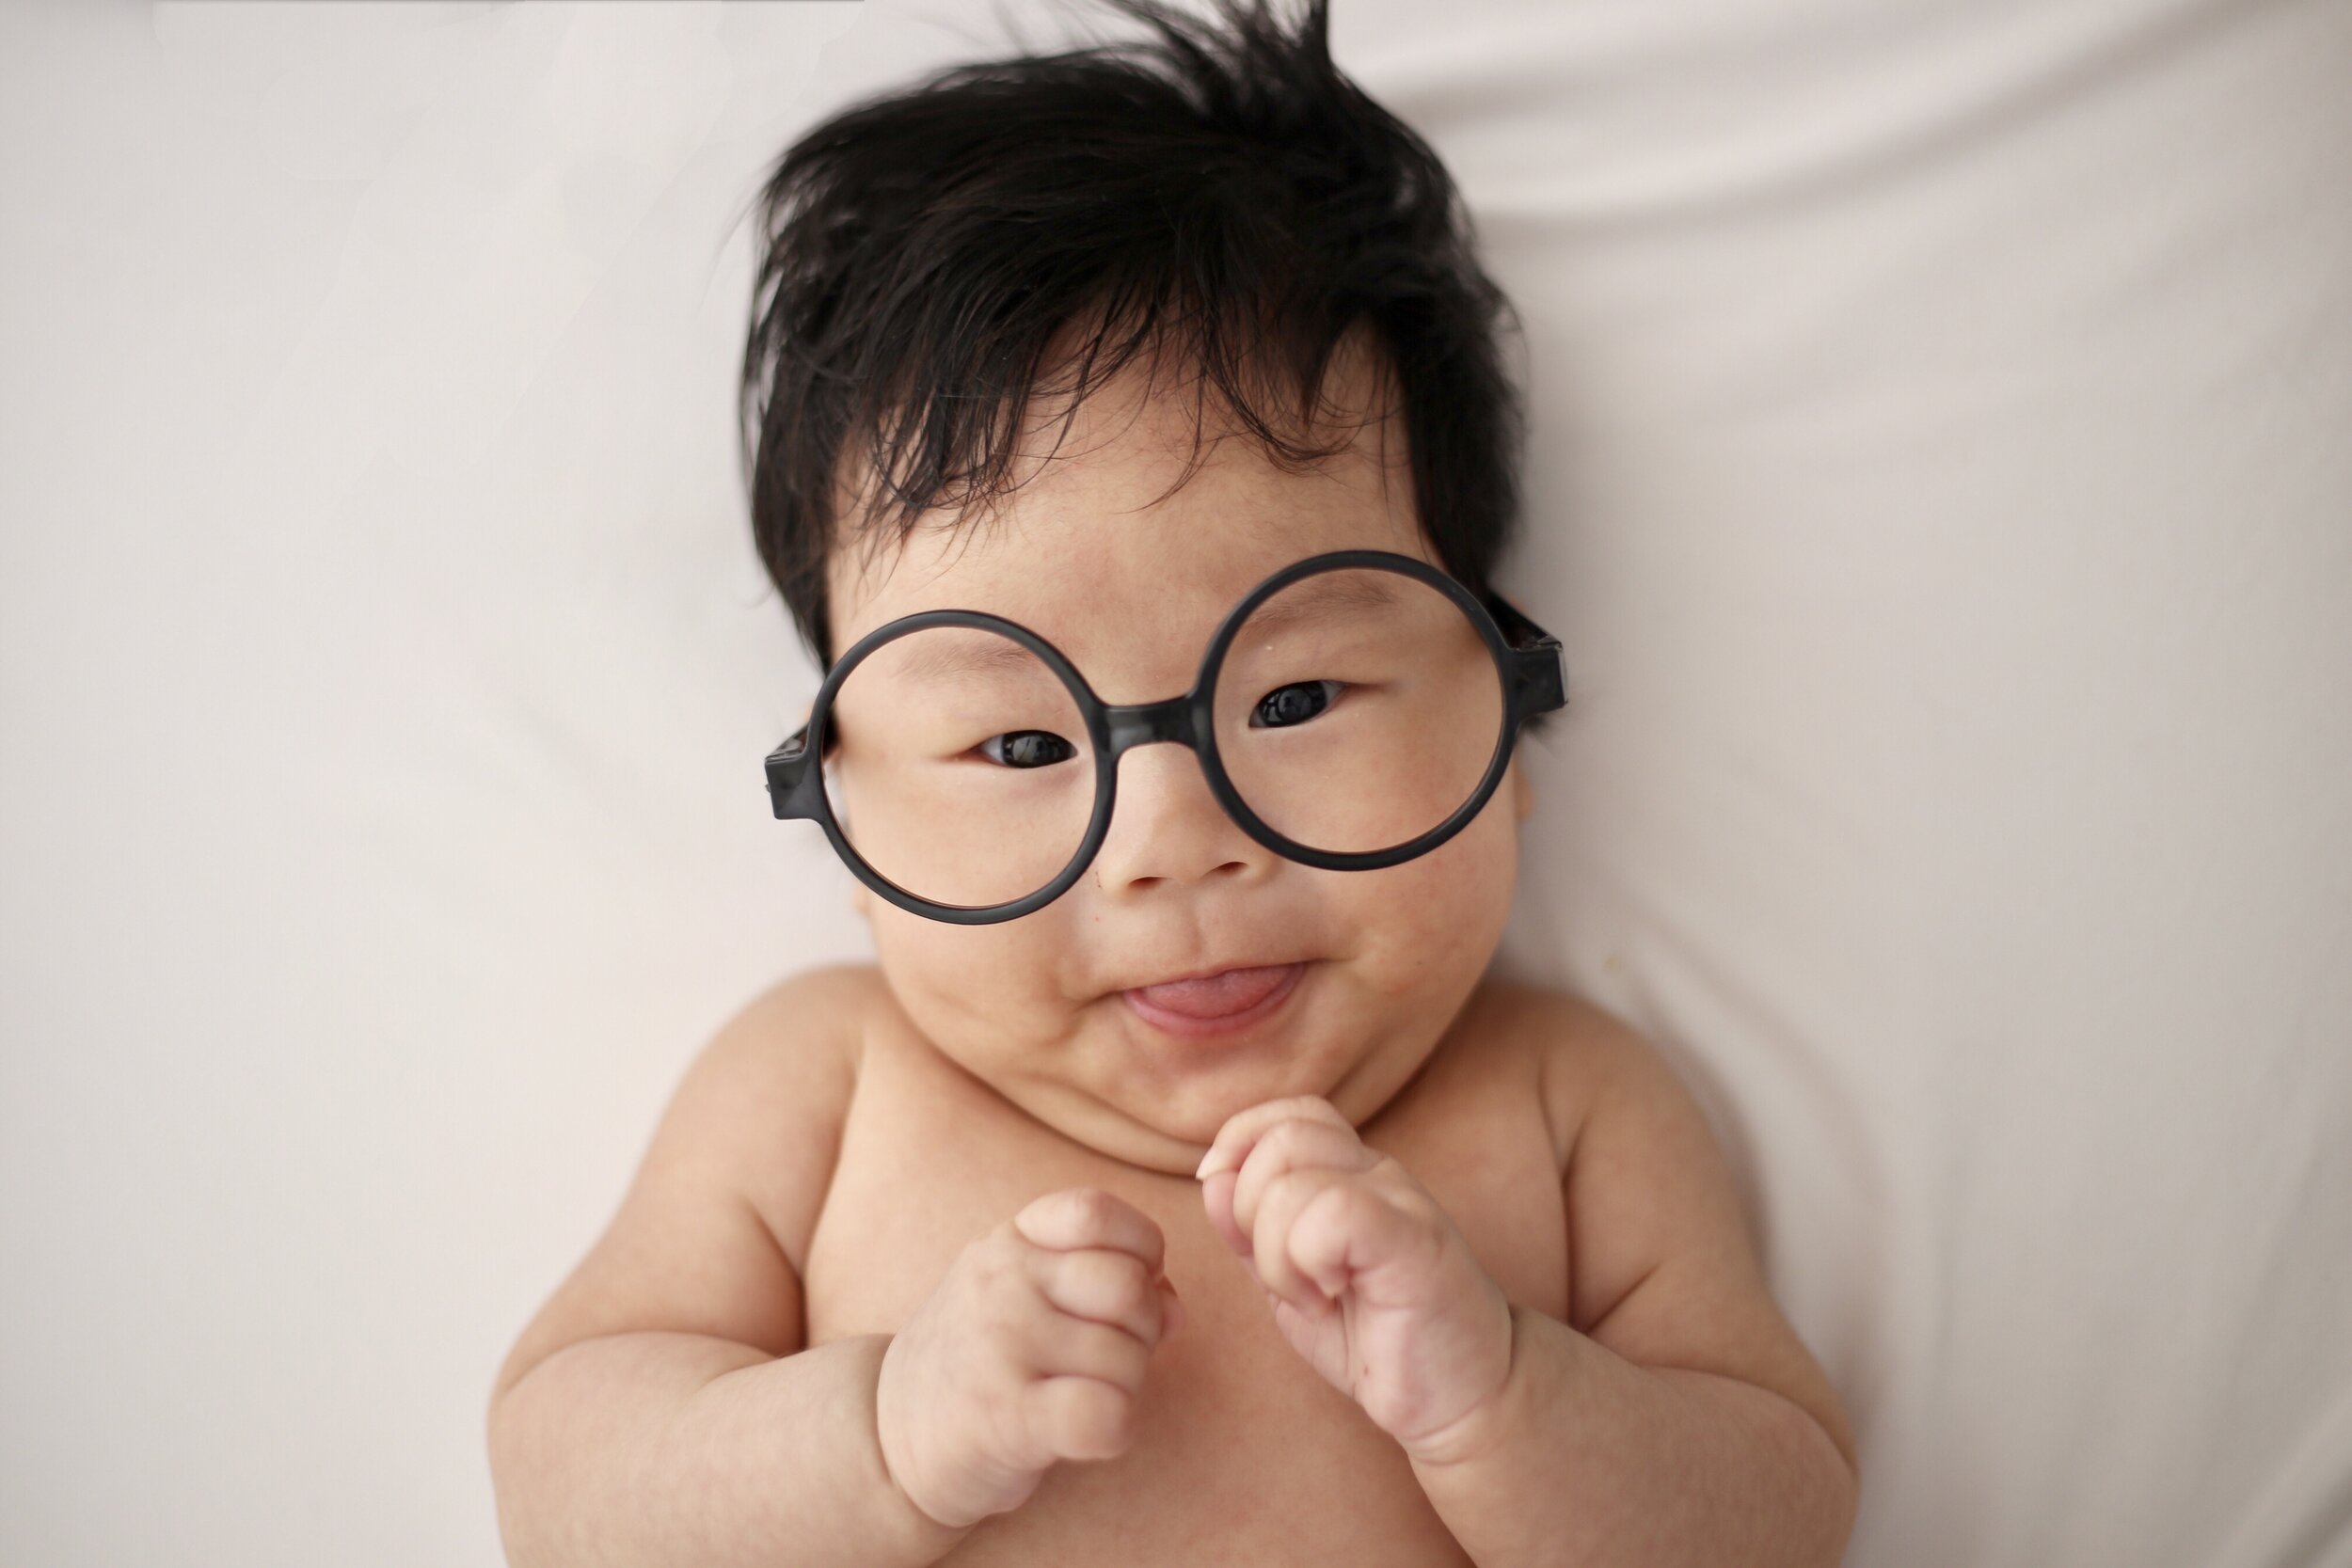 Babies born to older mothers tend to be smarter.